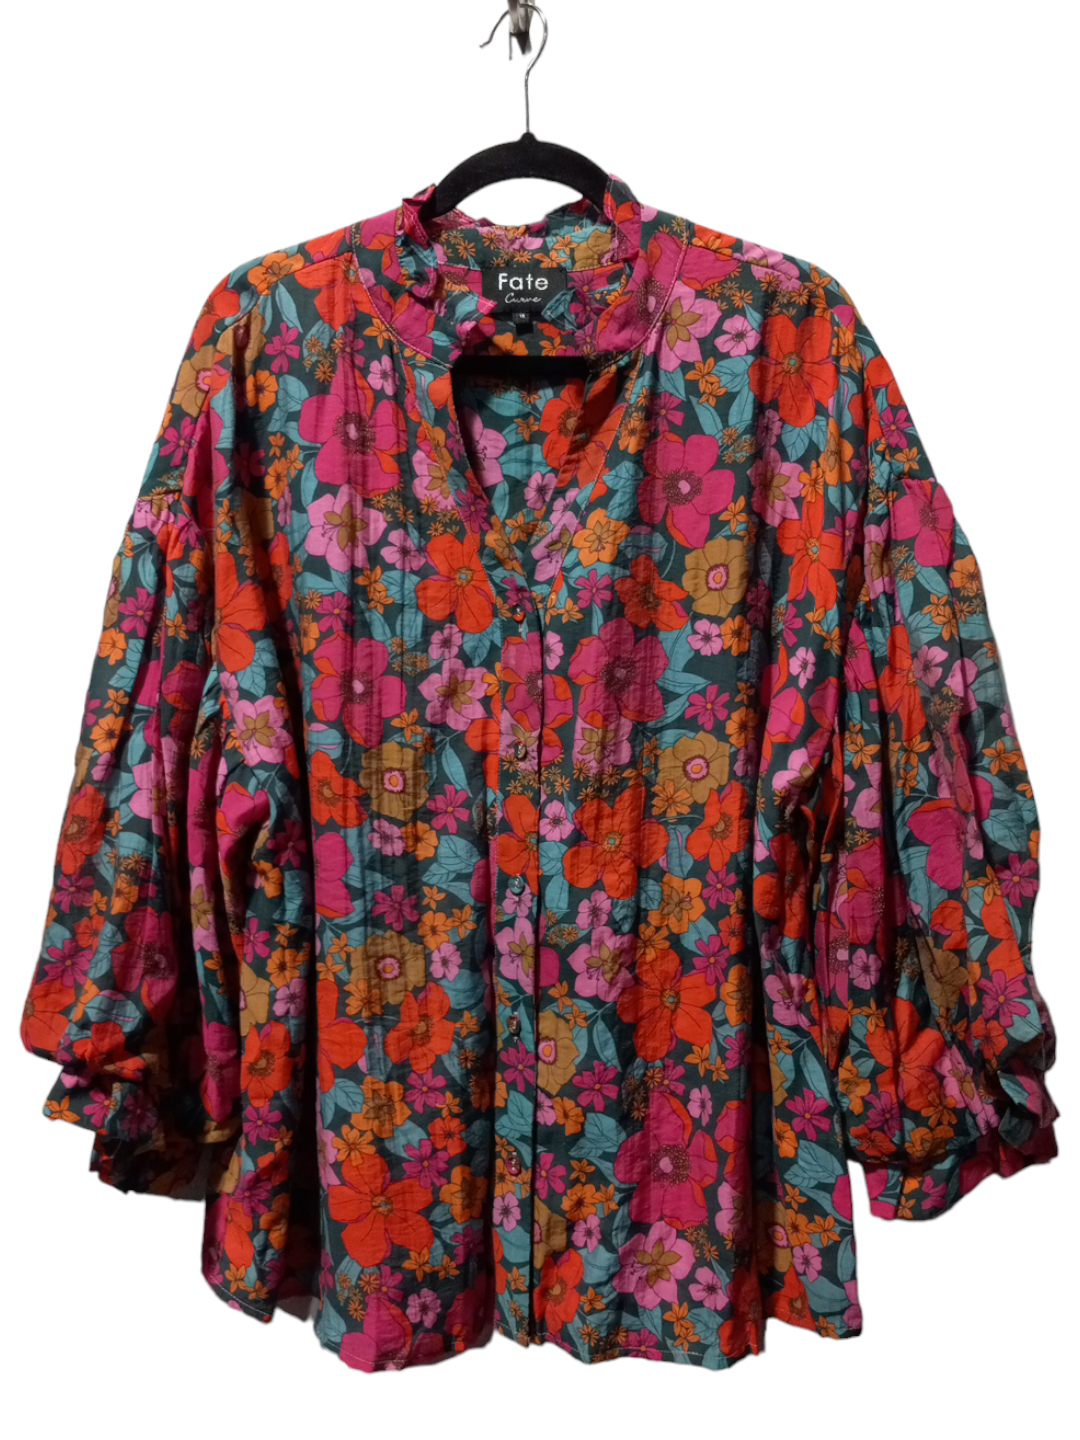 Floral Print Blouse 3/4 Sleeve Fate, Size 1x